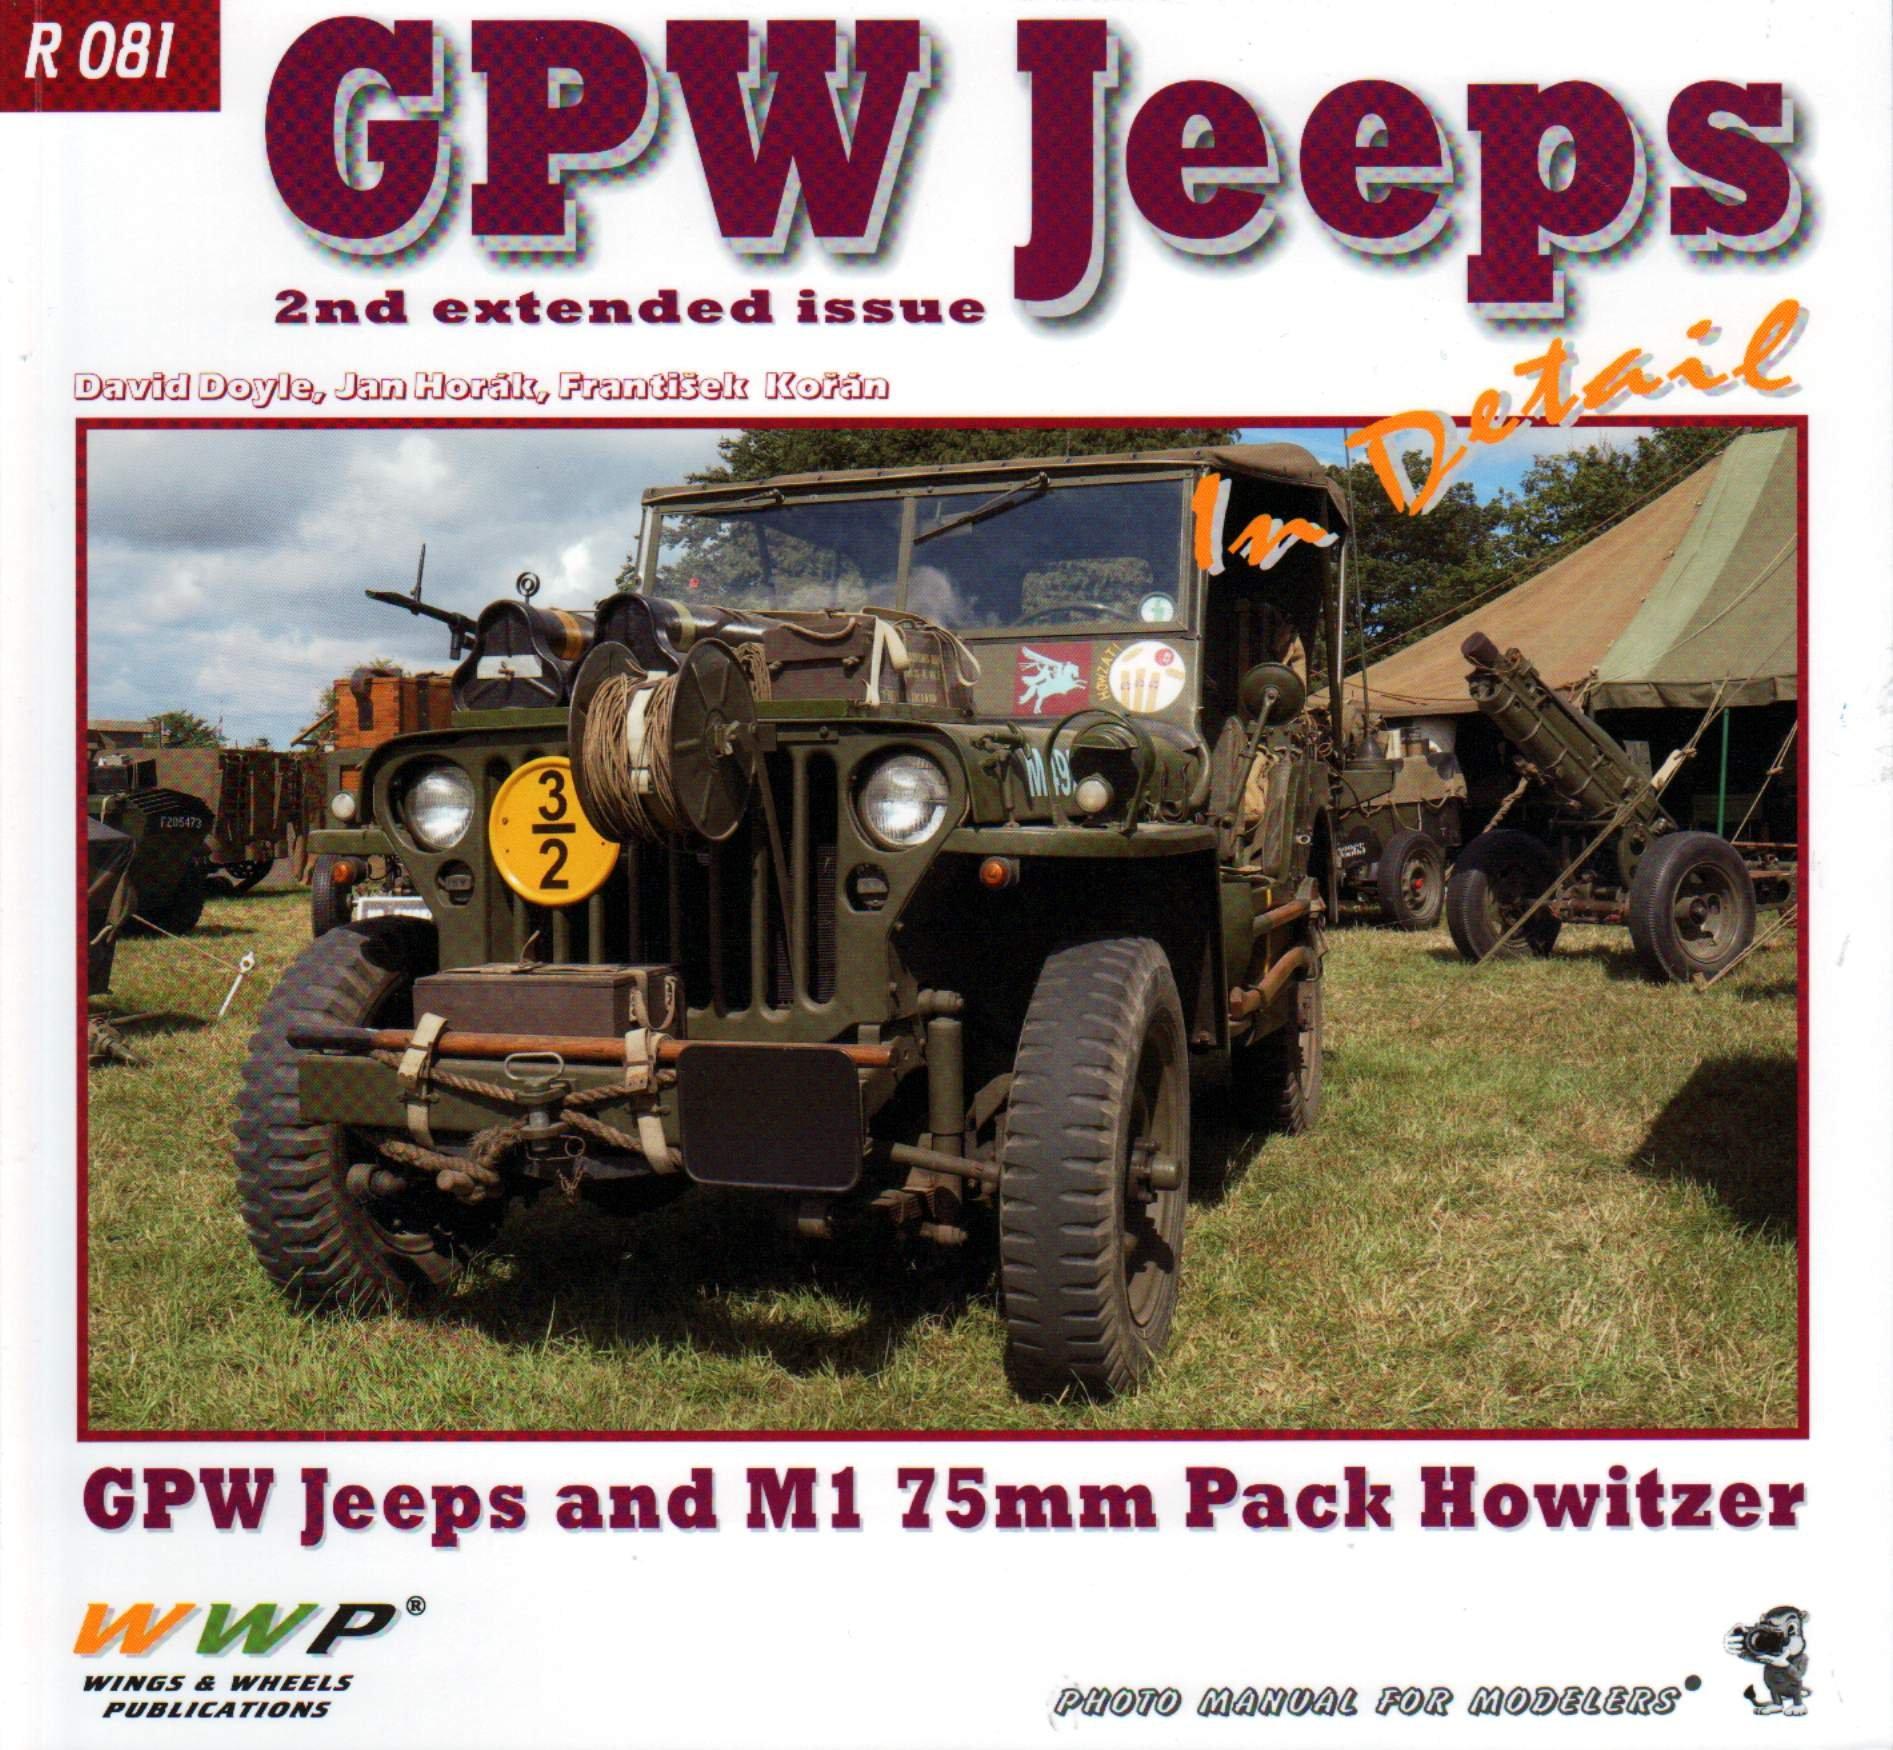 GPW Jeeps in Detail - 2nd extended issue